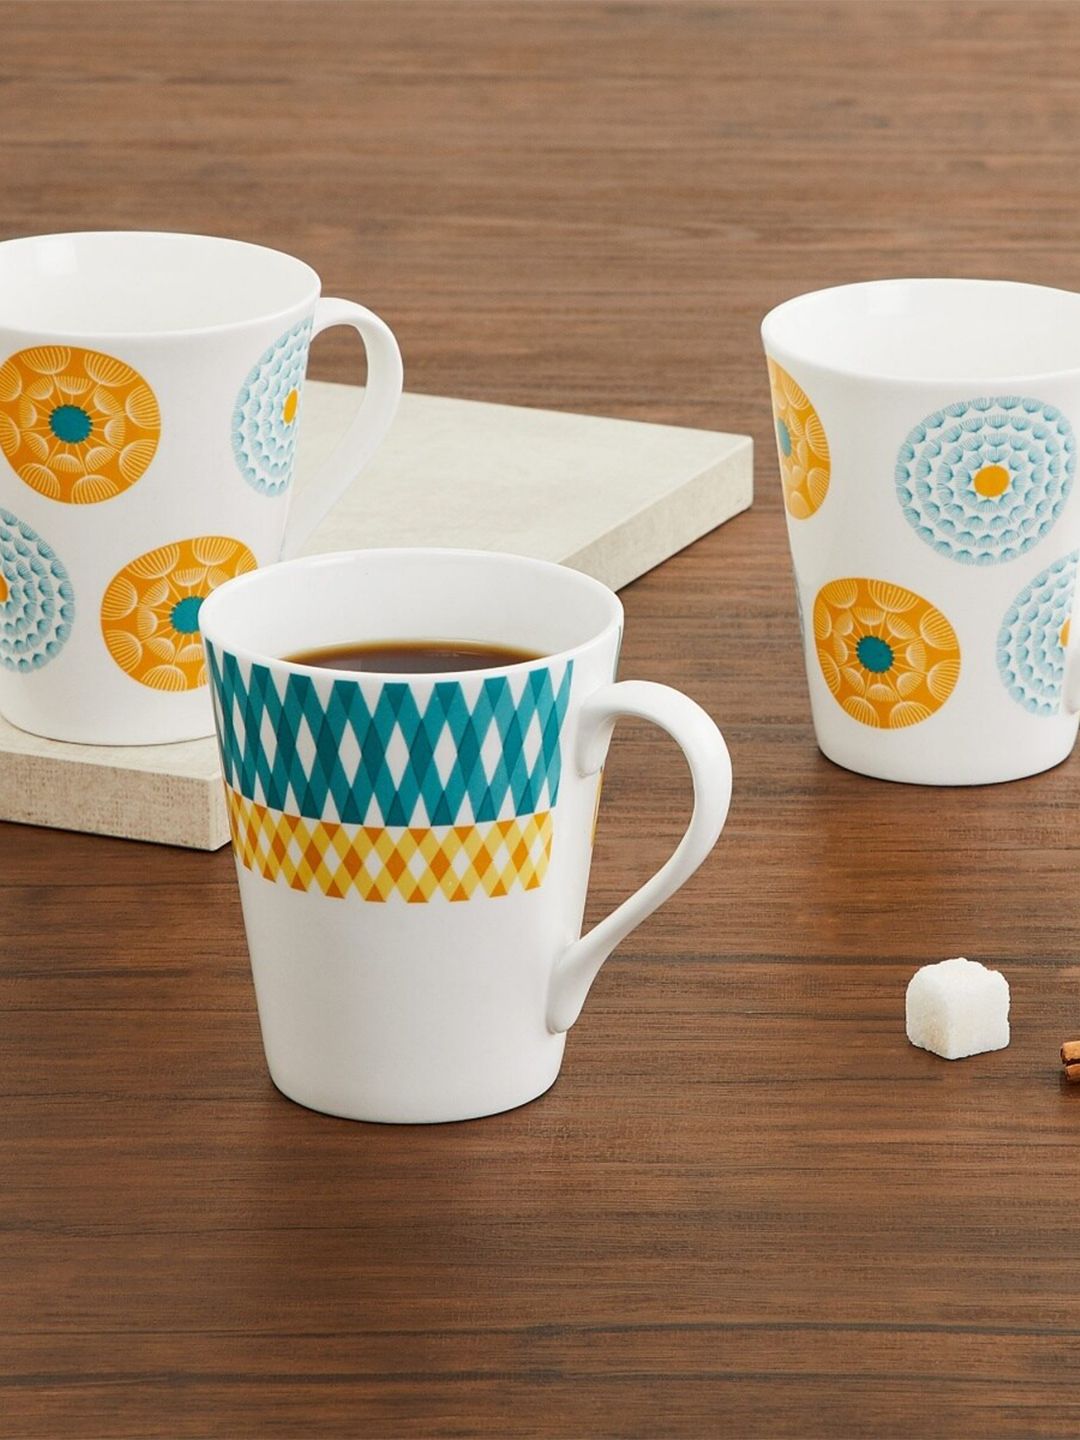 Home Centre Blue & Yellow Printed Bone China Glossy Mugs Set of Cups and Mugs Price in India